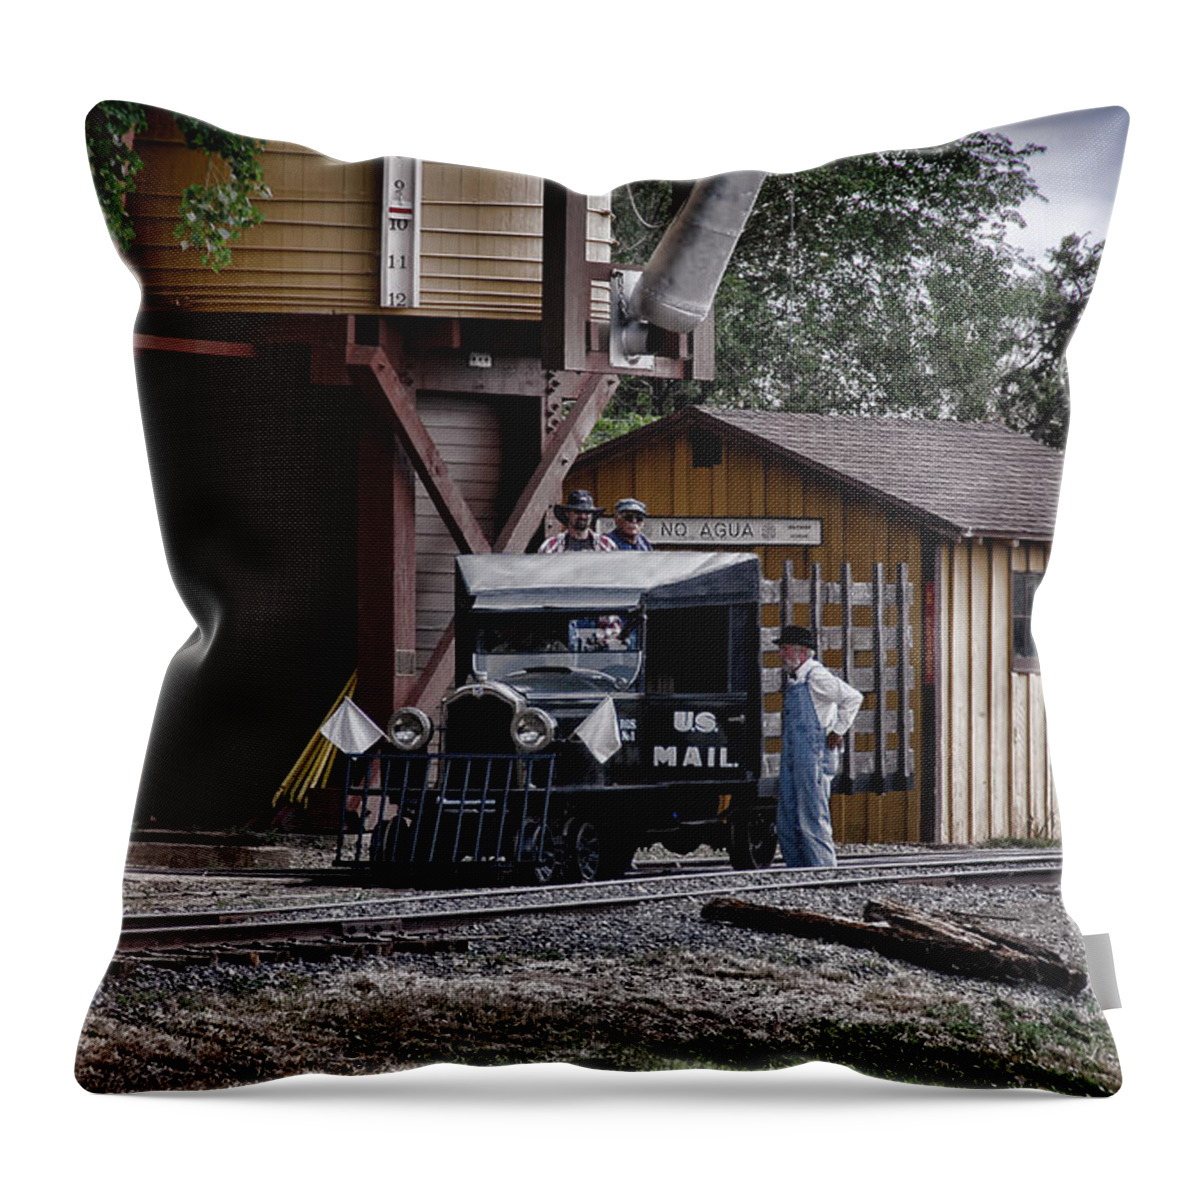 Rio Grande Soutern 41 Throw Pillow featuring the photograph Mail Delivery on the Rio Grande Southern by Ken Smith